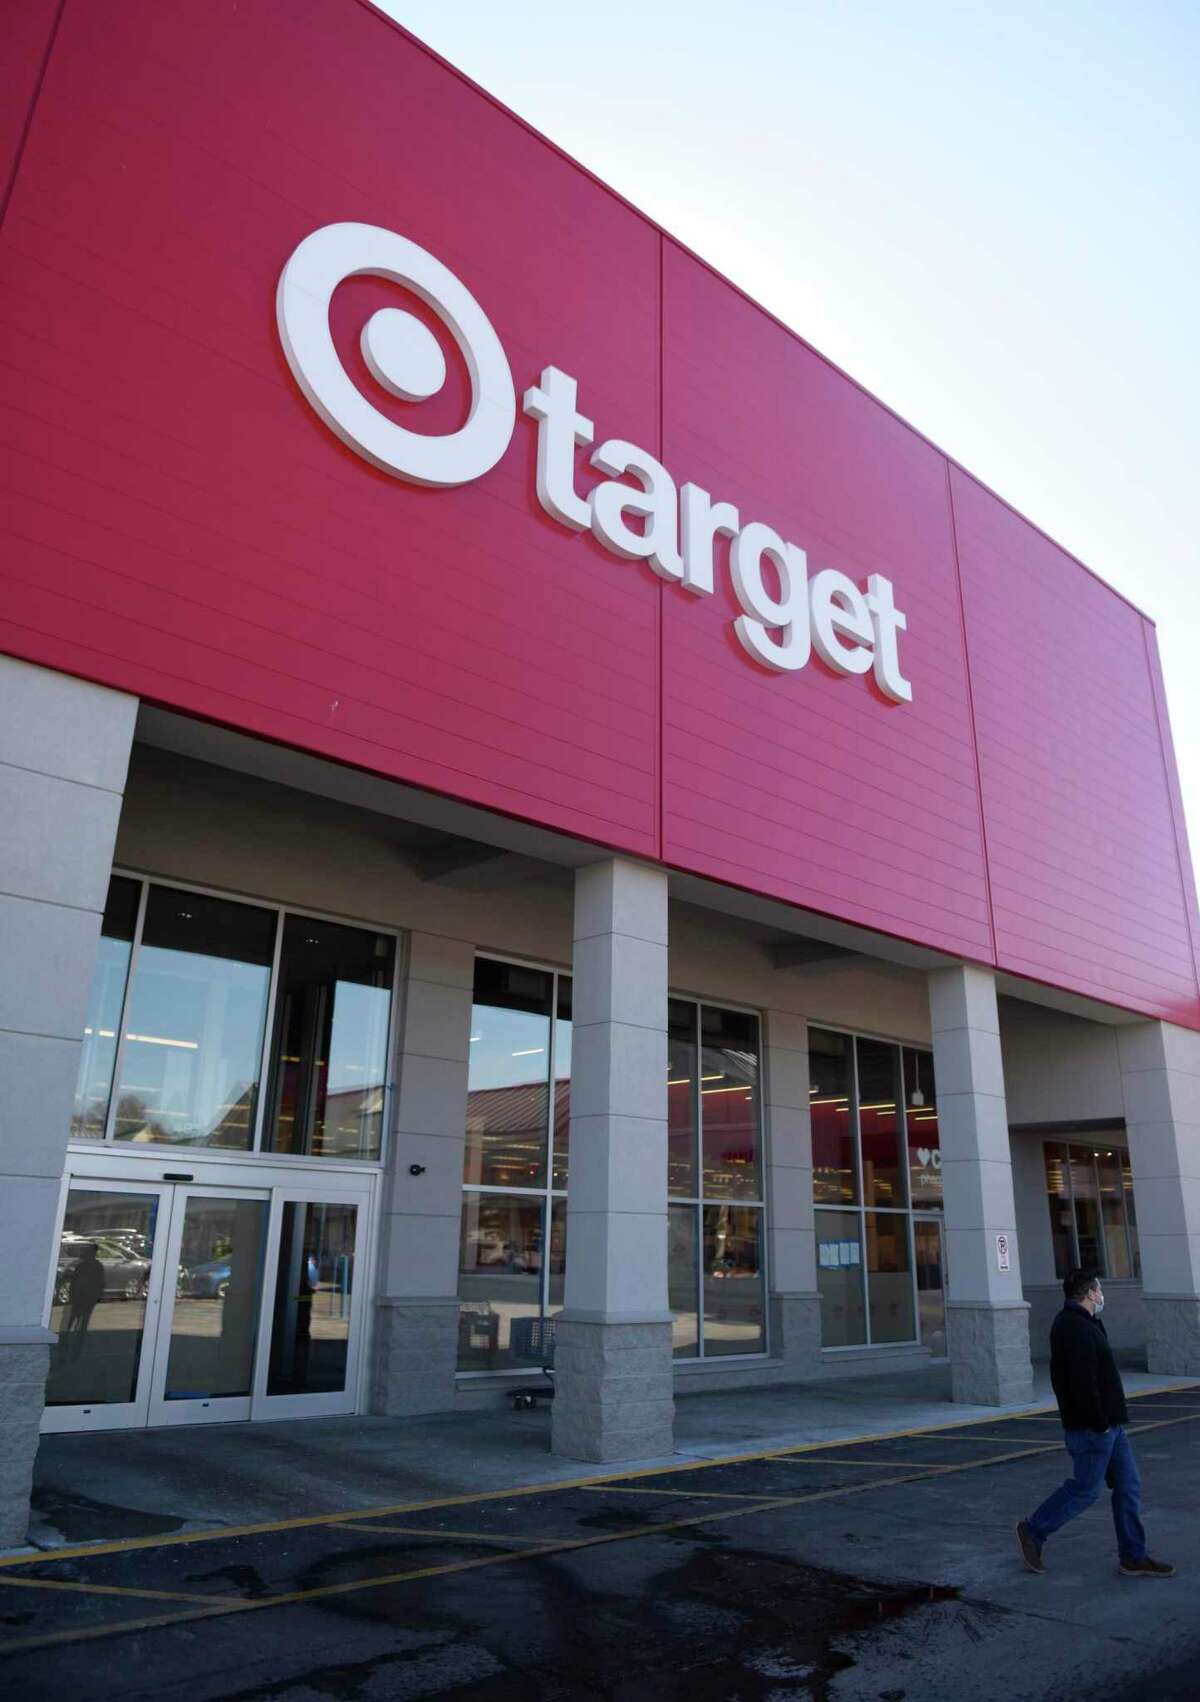 The new Target at the Gateway shopping center in Port Chester, N.Y., photographed on Monday, Feb. 28, 2022. Located at 495 Boston Post Rd., the two-floor, 89,000 sq. ft. store will open soon.